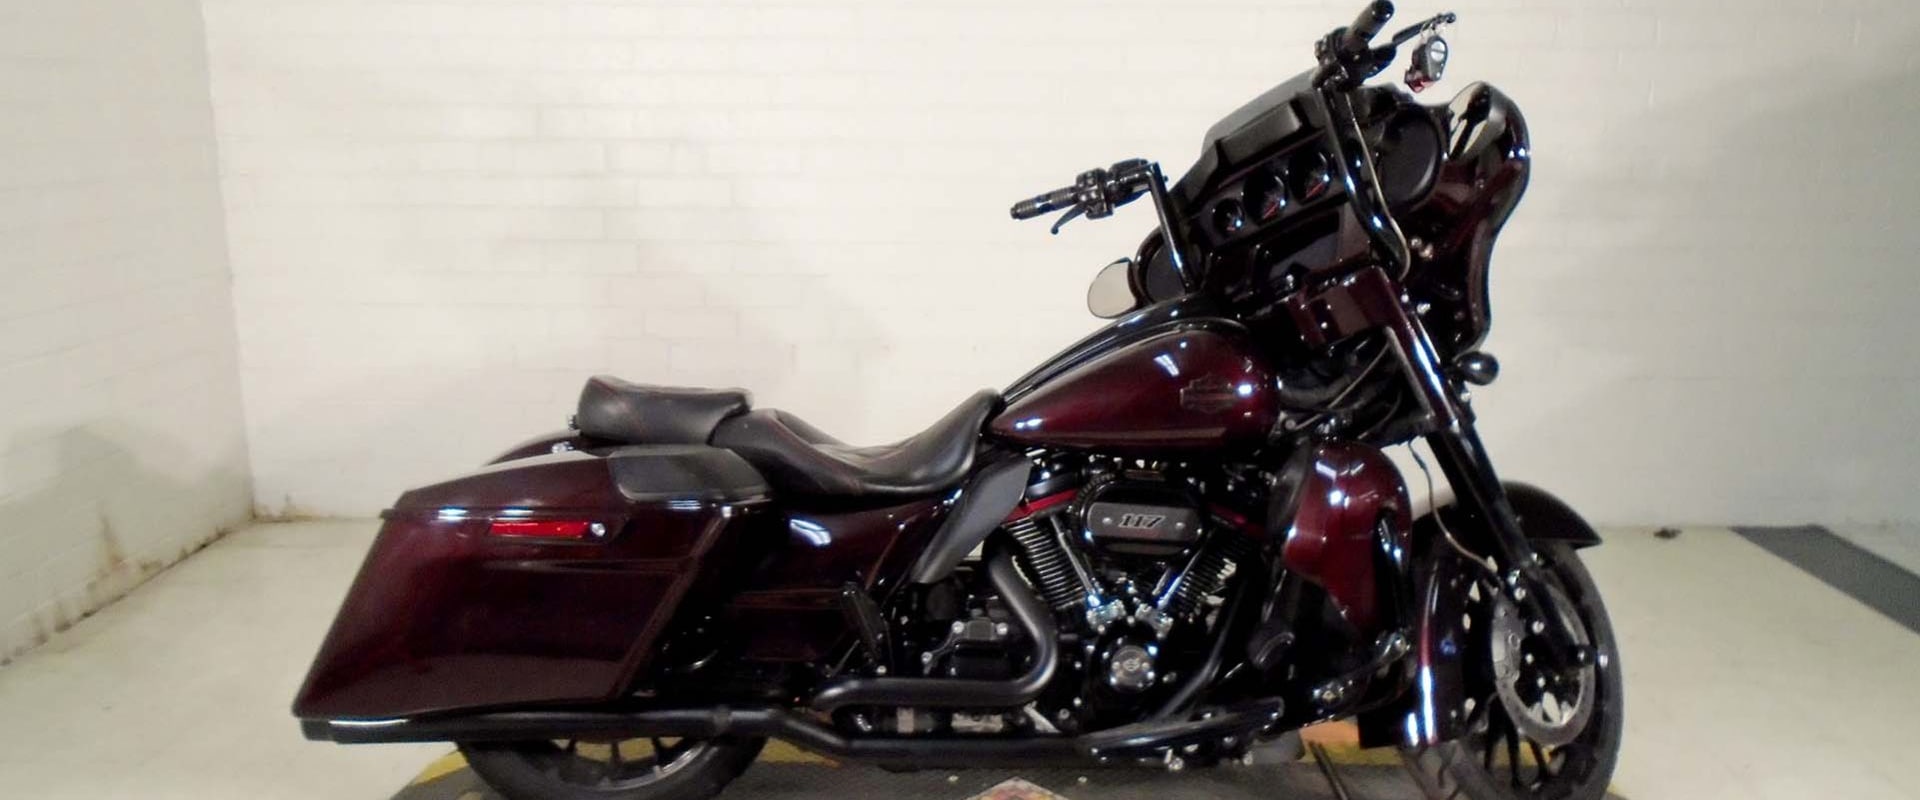 Customization Options: How to Select the Right Look for Your Motorcycle Club